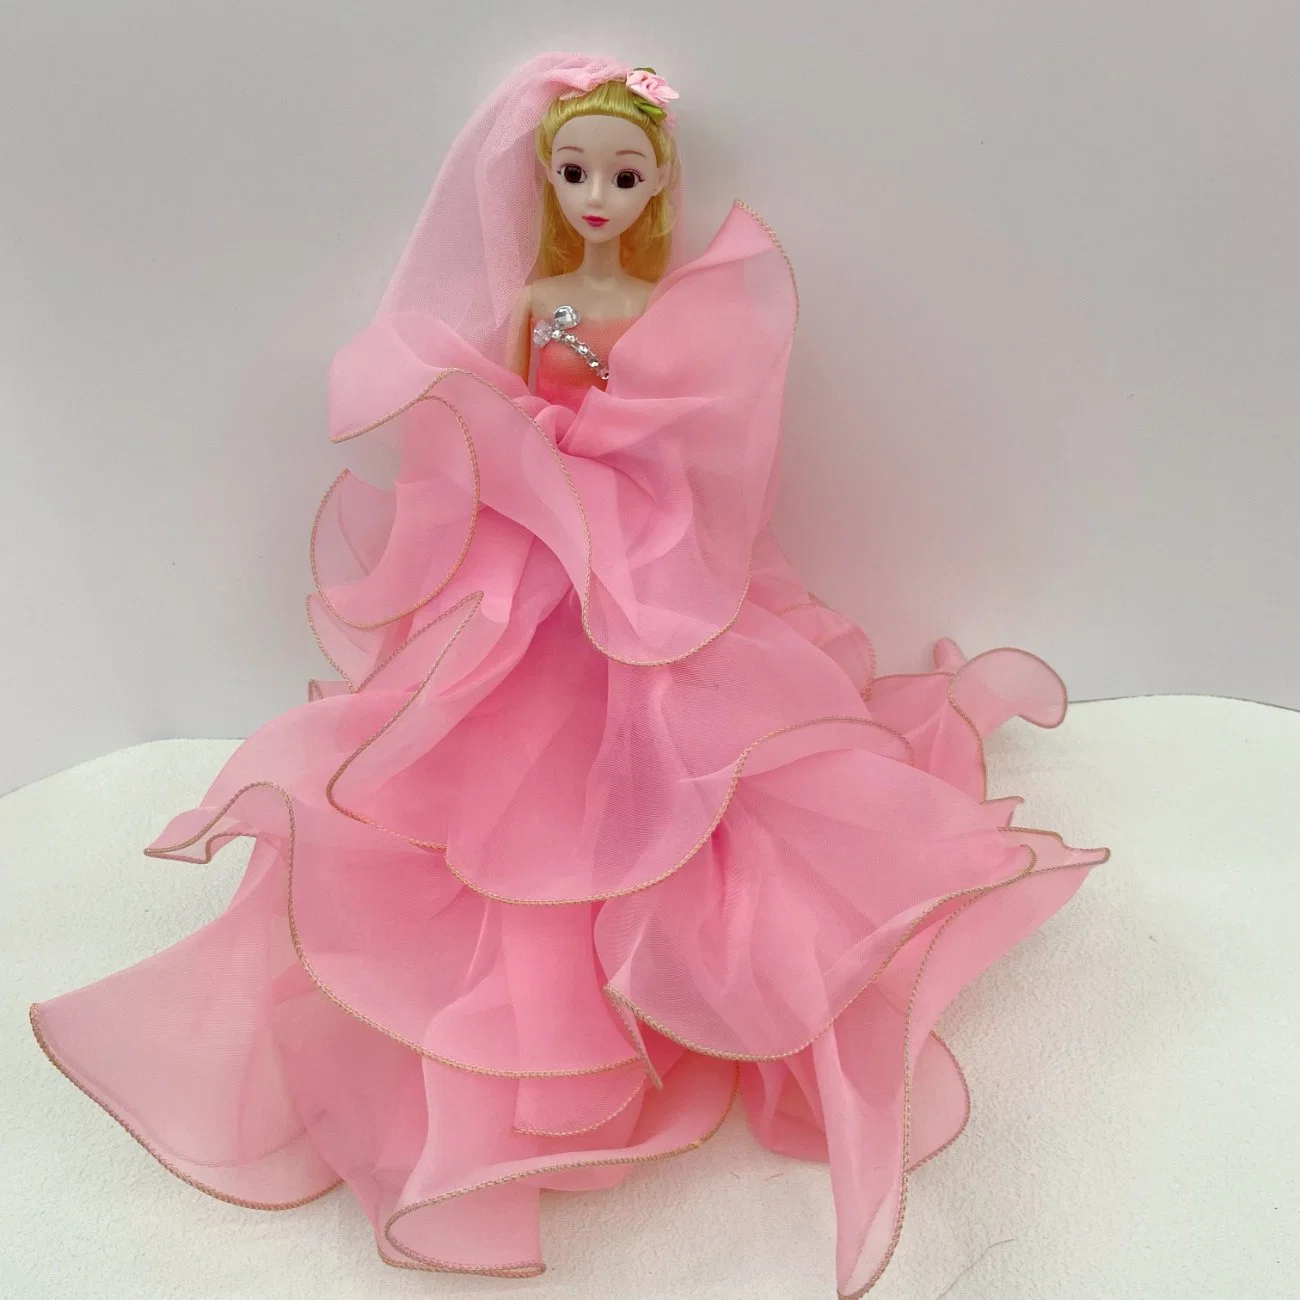 Wholesale/Supplier Fashion Barbiees Dolls Princess Girl Toy Mini Doll or Dress up Clothes Accessories Princessmusic and Singing